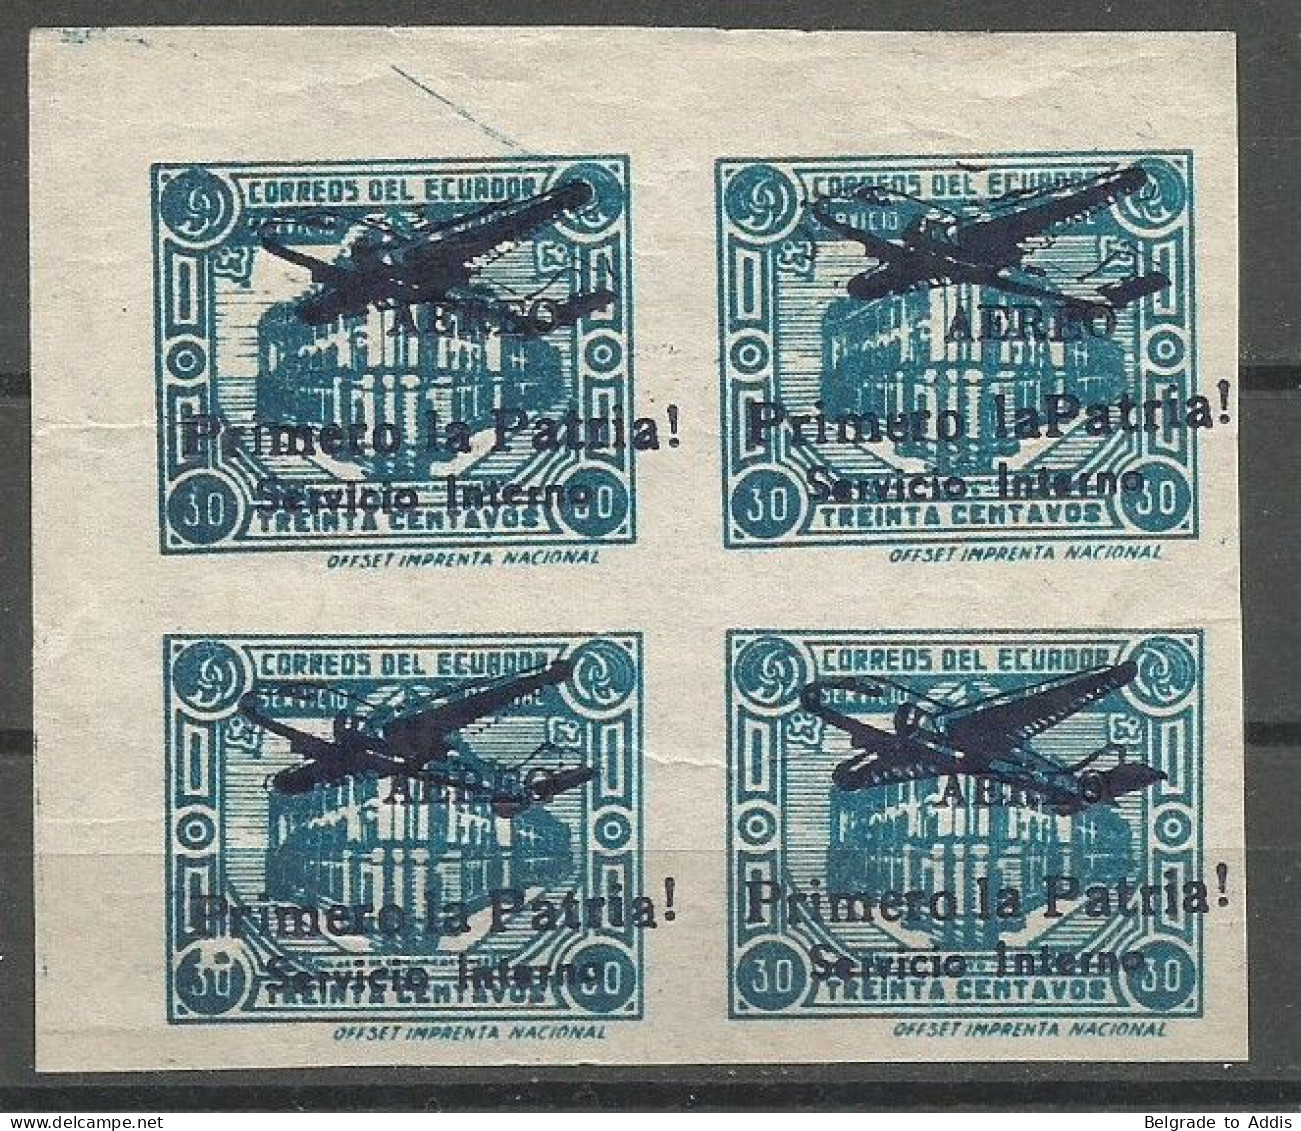 Ecuador Sanabria 207e Airmail 1947 IMPERFORATED Block Of 4 MNG Ith Plate Flaw In Overprint "LaPatria" + "Circle" On 30 - Ecuador